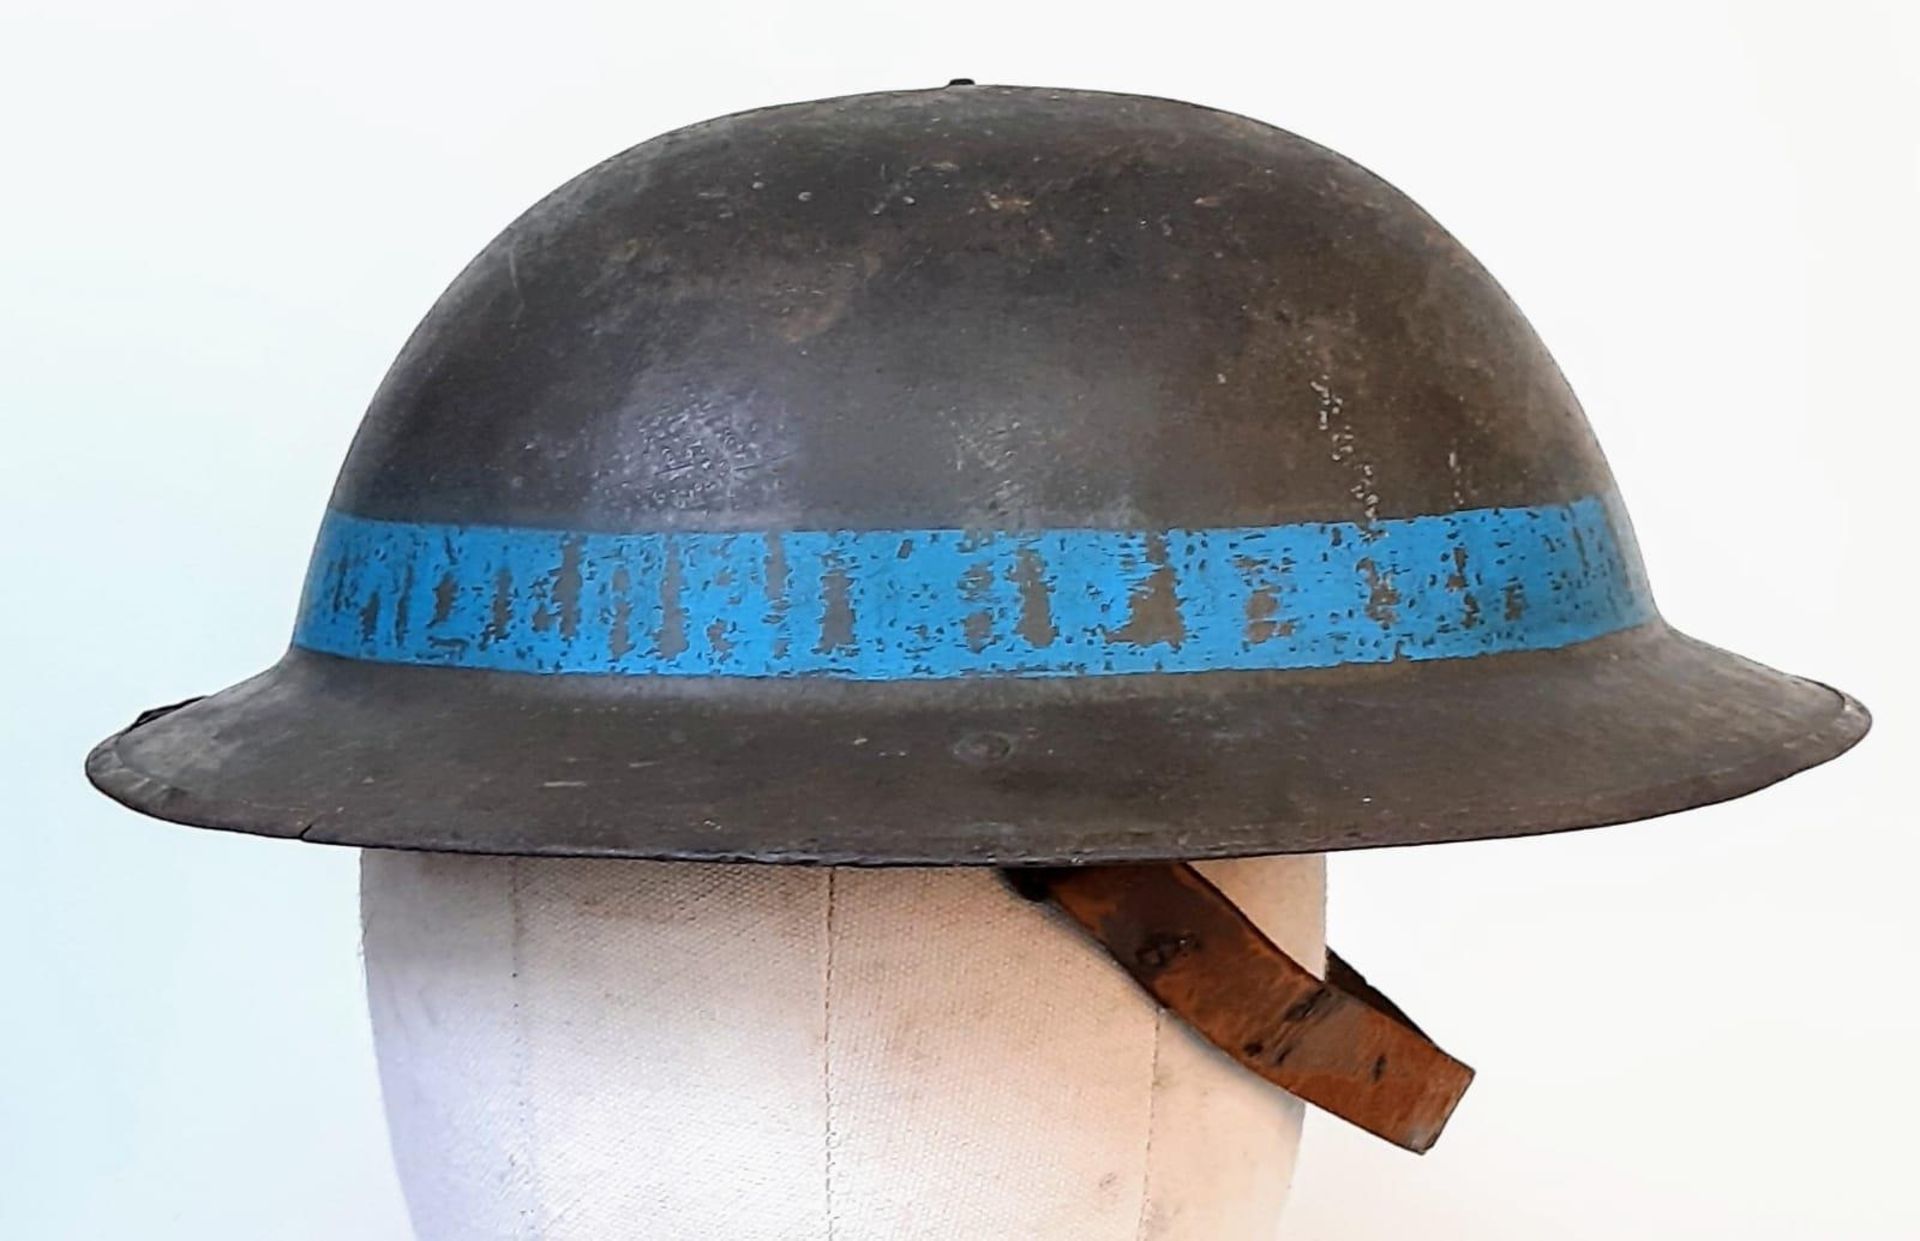 WW1 British Brodie Helmet with Blue Band for the 1st Bn East Yorks circa 1918. Lots of the - Image 4 of 7